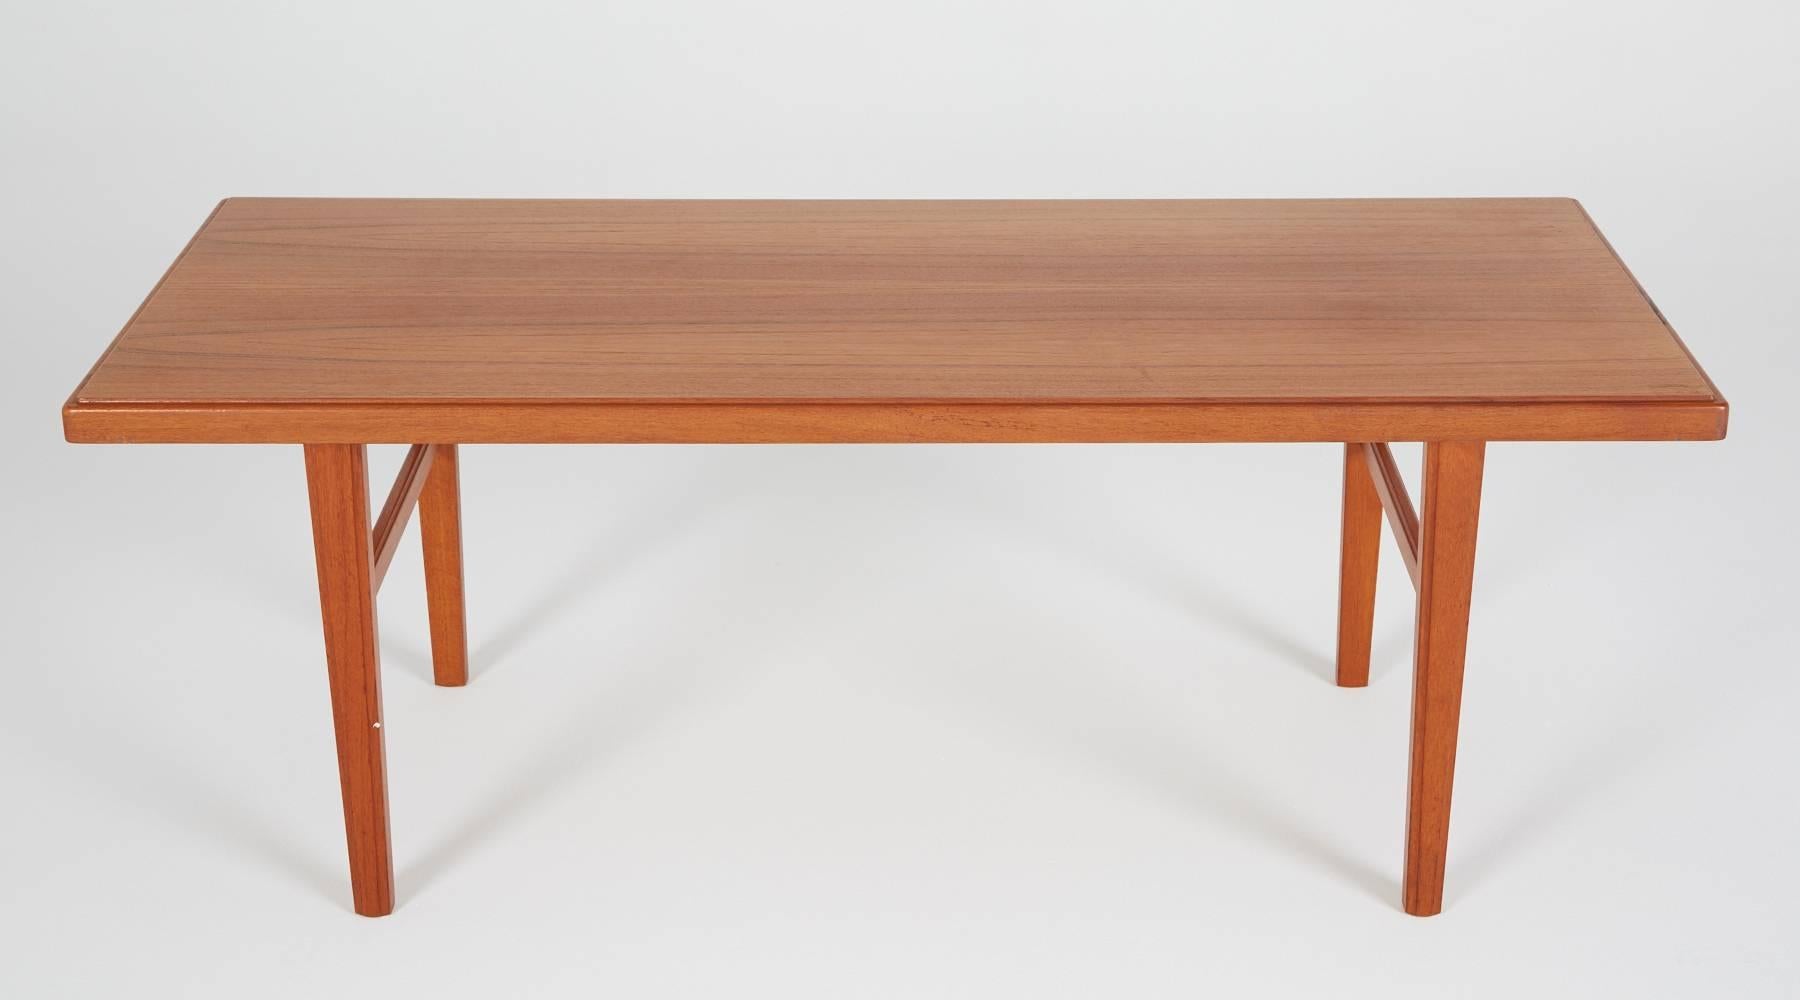 Clean lines, tapered legs, and rich teakwood construction, this is a great example of a Classic, Mid-Century Modern Danish furniture. This long table of 58